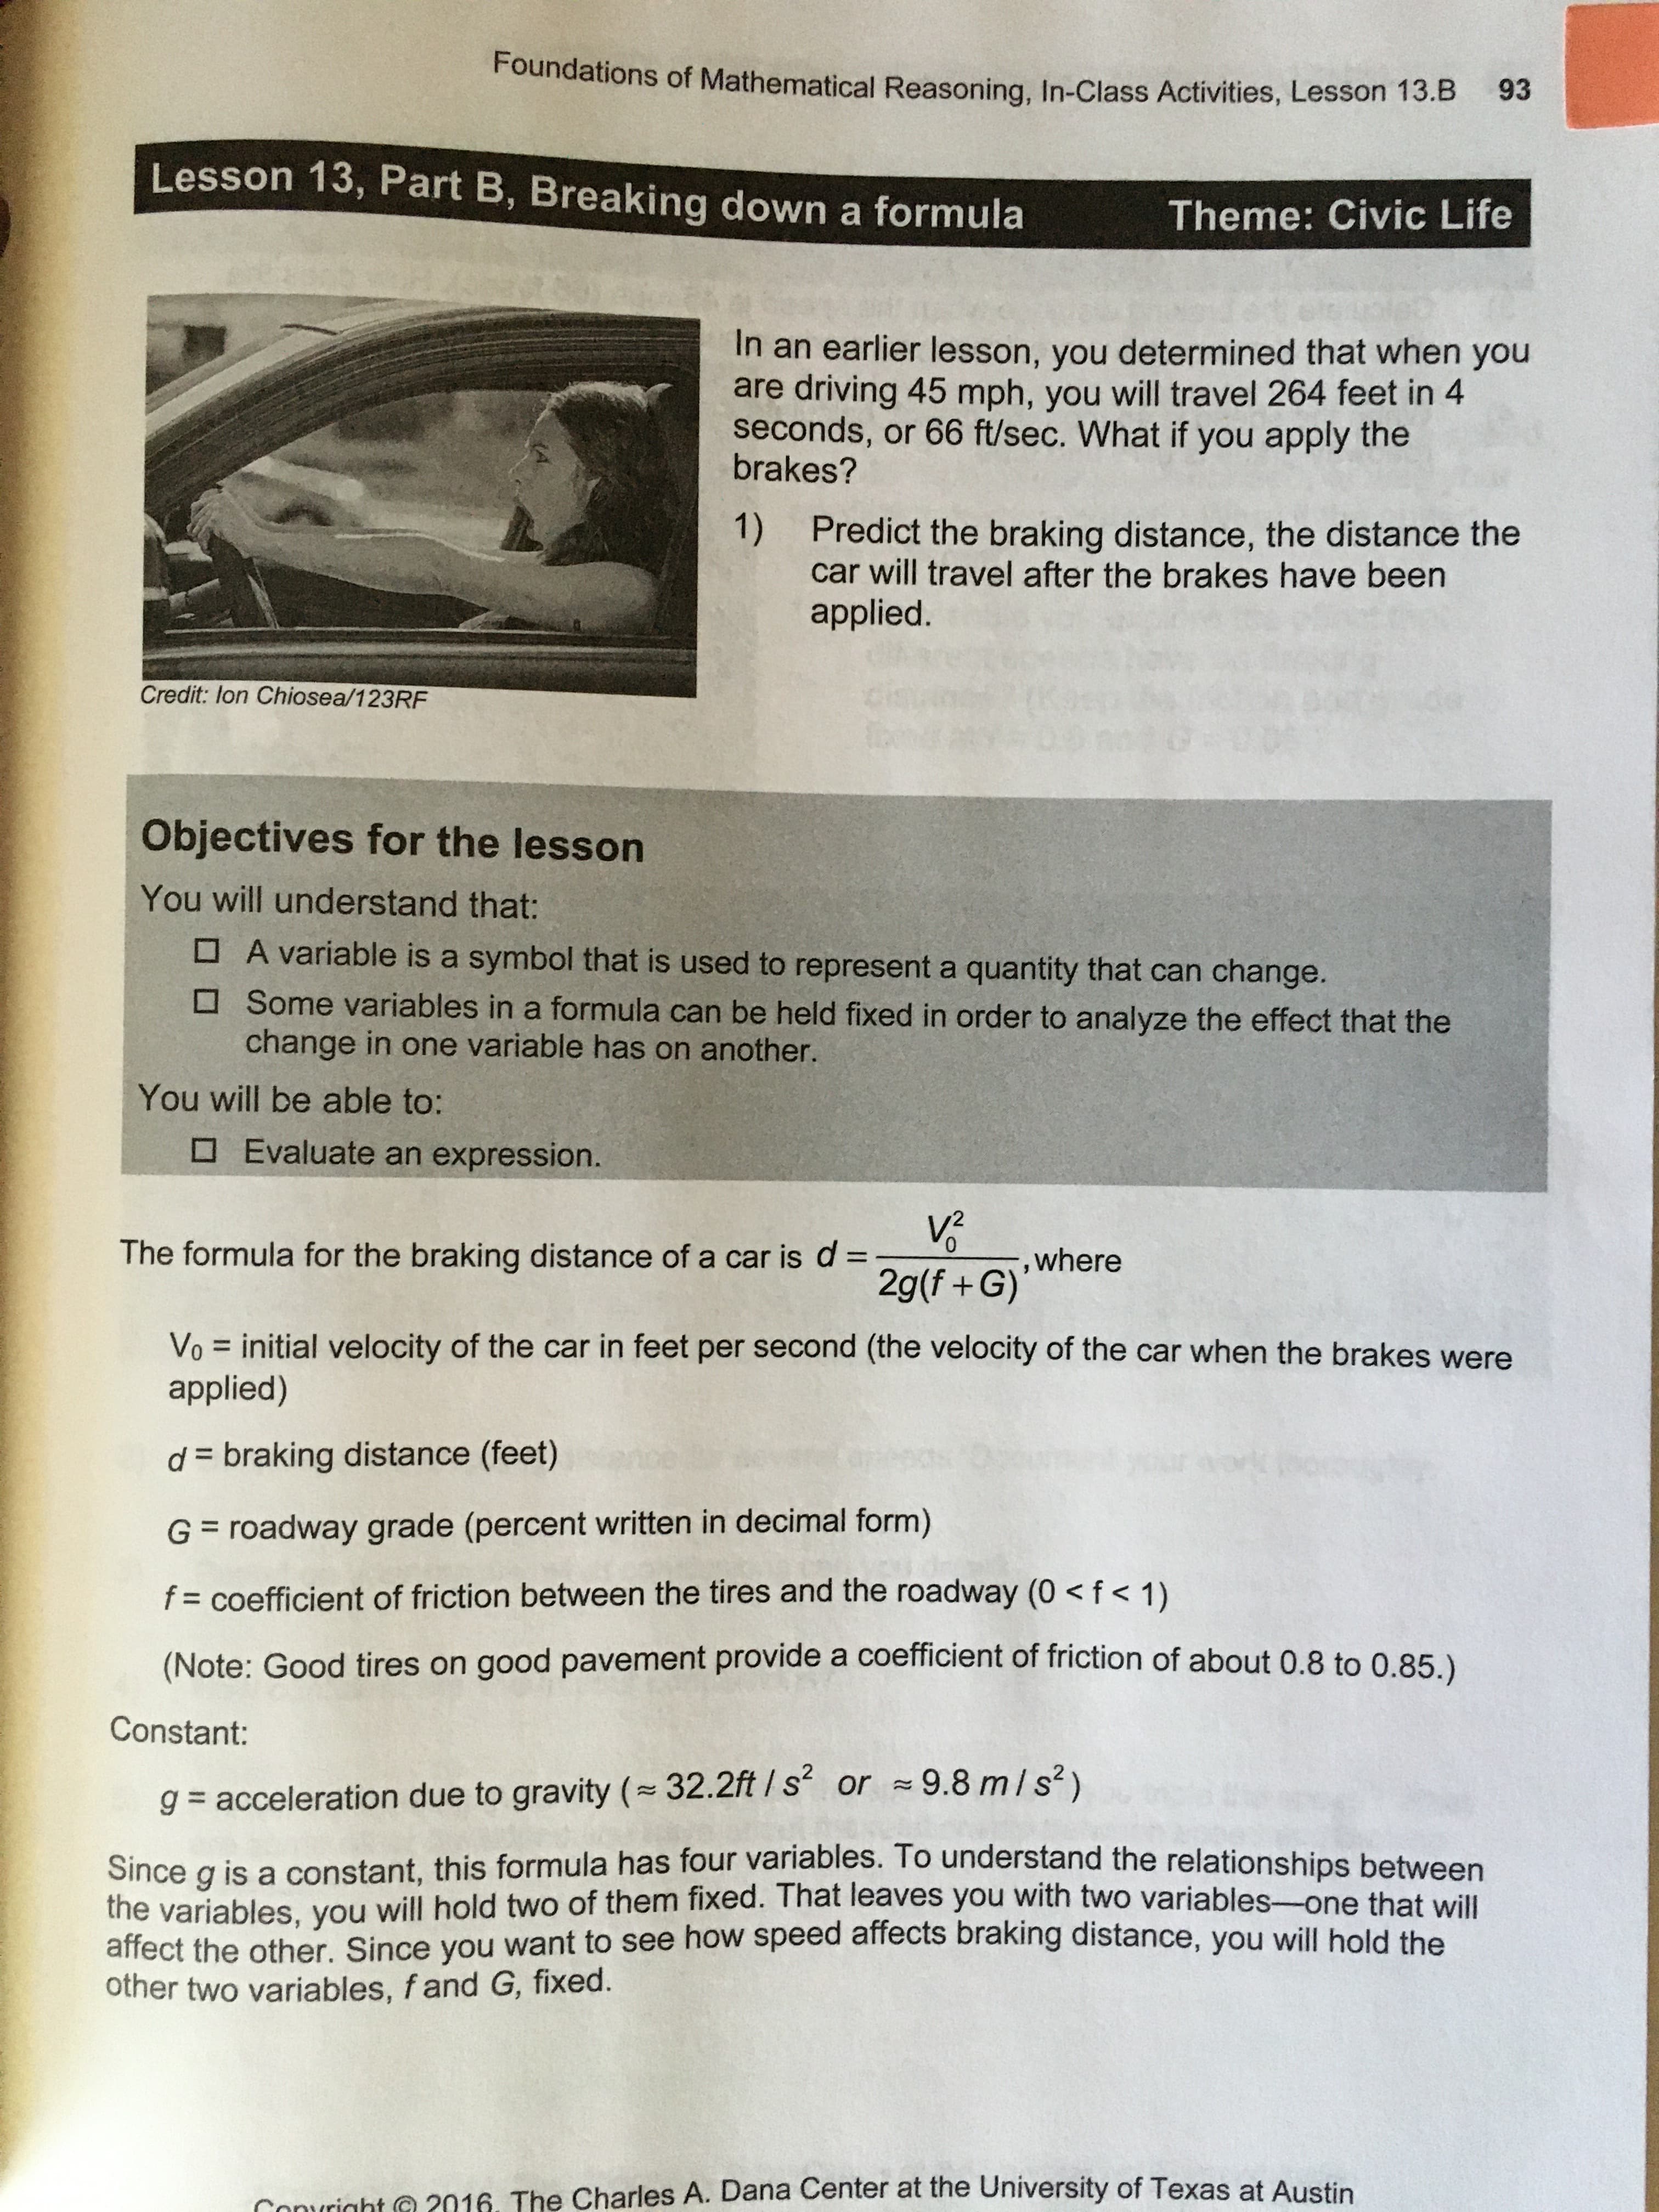 Foundations of Mathematical Reasoning, In-Class Activities, Lesson 13.B
93
Lesson 13, Part B, Breaking down a formula
Theme: Civic Life
In an earlier lesson, you determined that when you
are driving 45 mph, you will travel 264 feet in 4
seconds, or 66 ft/sec. What if you apply the
brakes?
1)
Predict the braking distance, the distance the
car will travel after the brakes have been
applied.
Credit: lon Chiosea/123RF
Objectives for the lesson
You will understand that:
O A variable is a symbol that is used to represent a quantity that can change.
O Some variables in a formula can be held fixed in order to analyze the effect that the
change in one variable has on another.
You will be able to:
O Evaluate an expression.
The formula for the braking distance of a car is d =
0.
,where
%3D
2g(f +G)
Vo = initial velocity of the car in feet per second (the velocity of the car when the brakes were
applied)
%3D
d = braking distance (feet)
G = roadway grade (percent written in decimal form)
f = coefficient of friction between the tires and the roadway (0 < f < 1)
(Note: Good tires on good pavement provide a coefficient of friction of about 0.8 to 0.85.)
Constant:
g = acceleration due to gravity (32.2ft / s or 9.8 m/s²)
Since g is a constant, this formula has four variables. To understand the relationships between
the variables. you will hold two of them fixed. That leaves you with two variables-one that will
affect the other. Since you want to see how speed affects braking distance, you will hold the
other two variables, f and G, fixed.
Convright C 2016. The Charles A. Dana Center at the University of Texas at Austin
